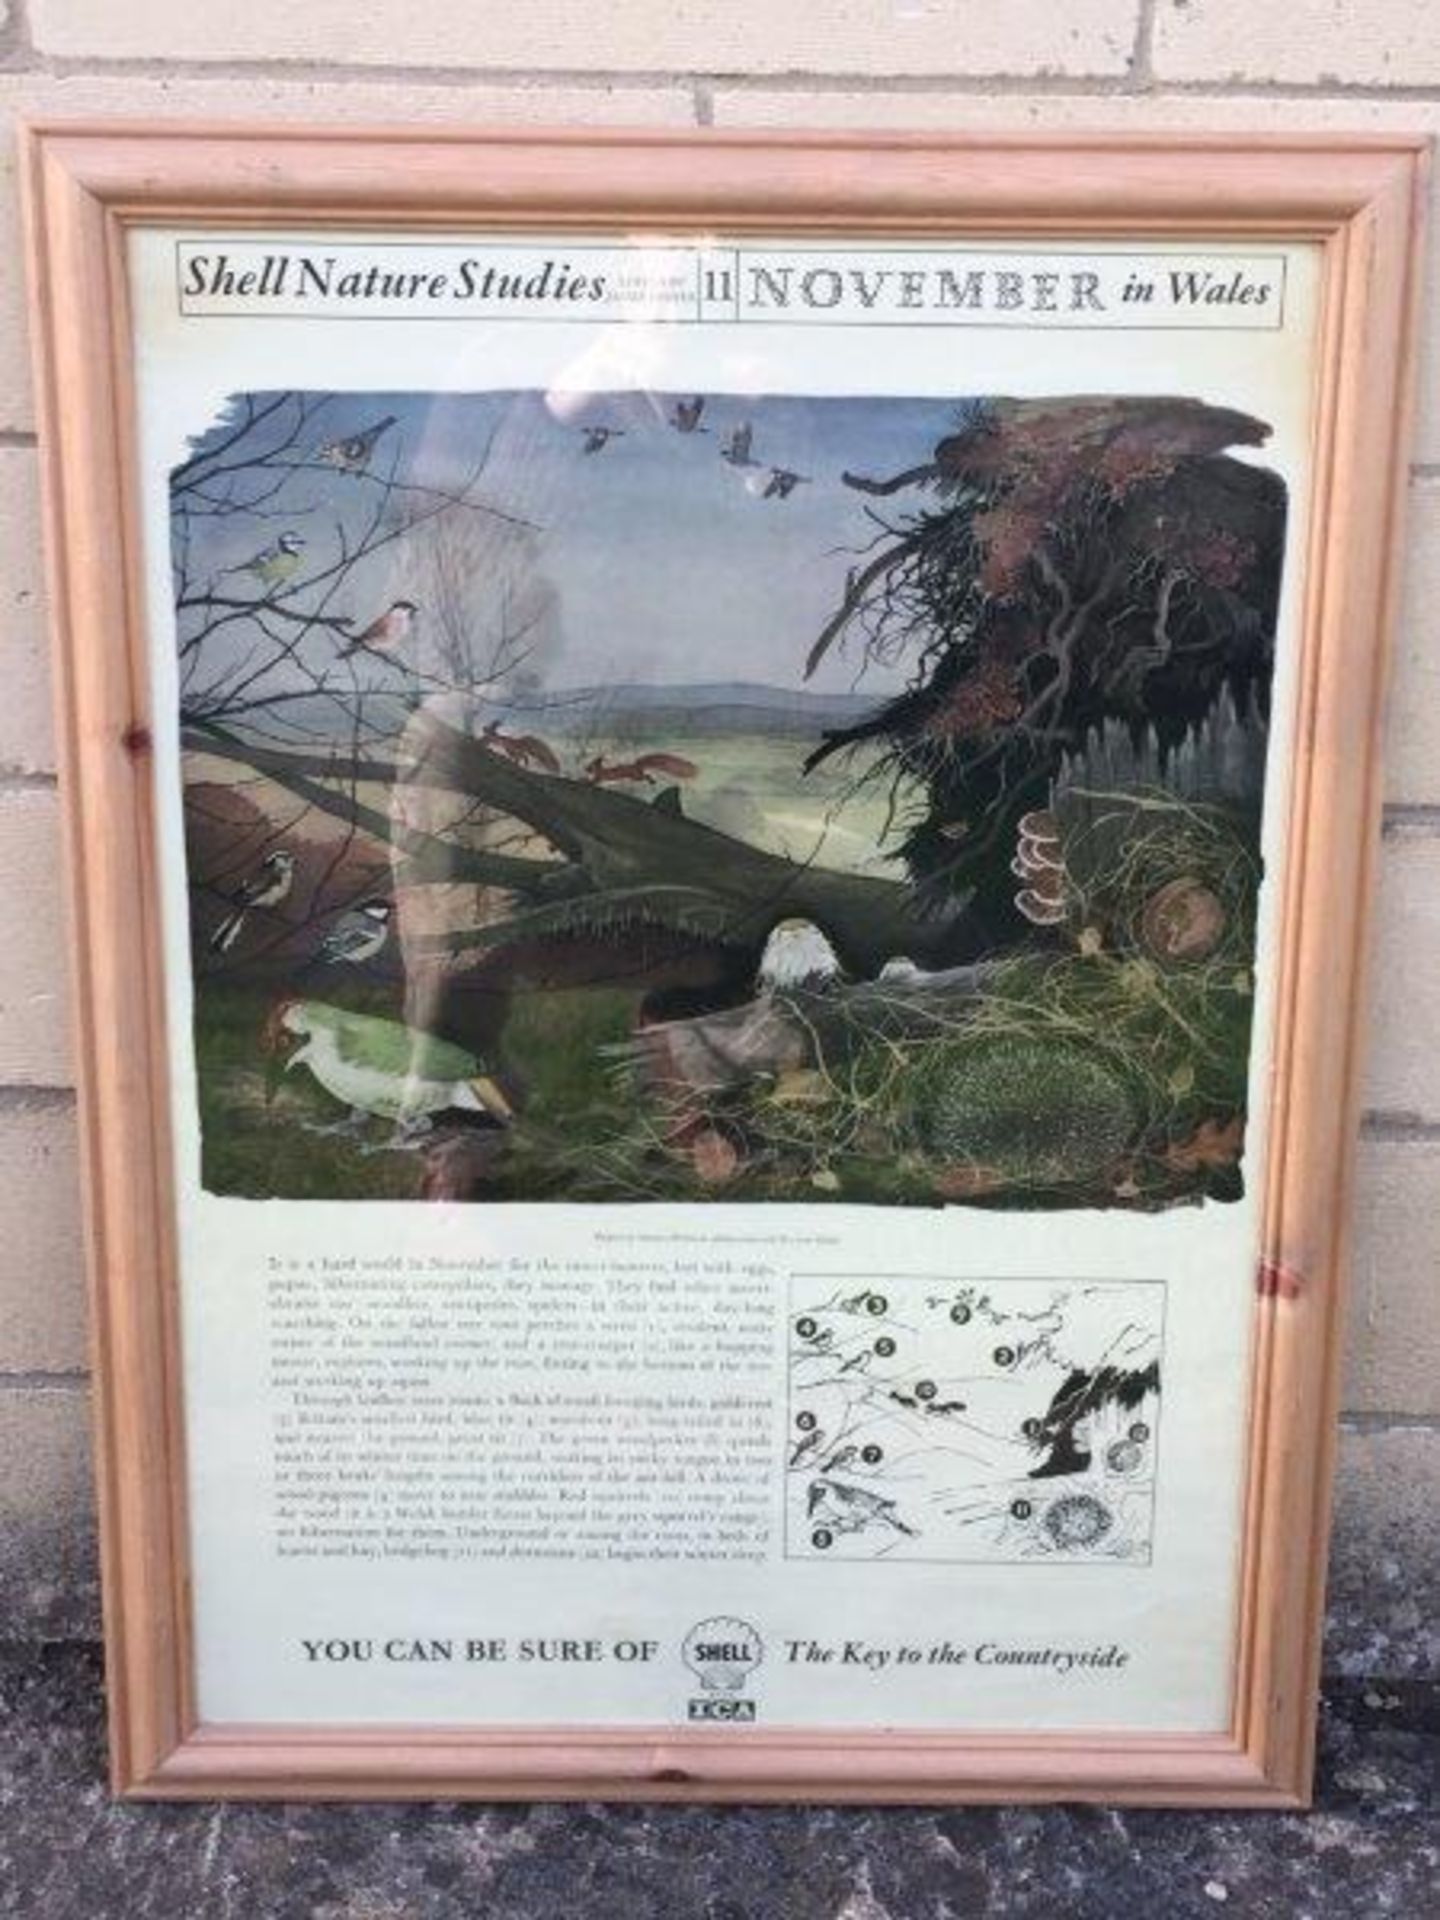 A Shell Nature Studies poster - November in Wales, framed and glazed, 22 3/4 x 29 3/4"